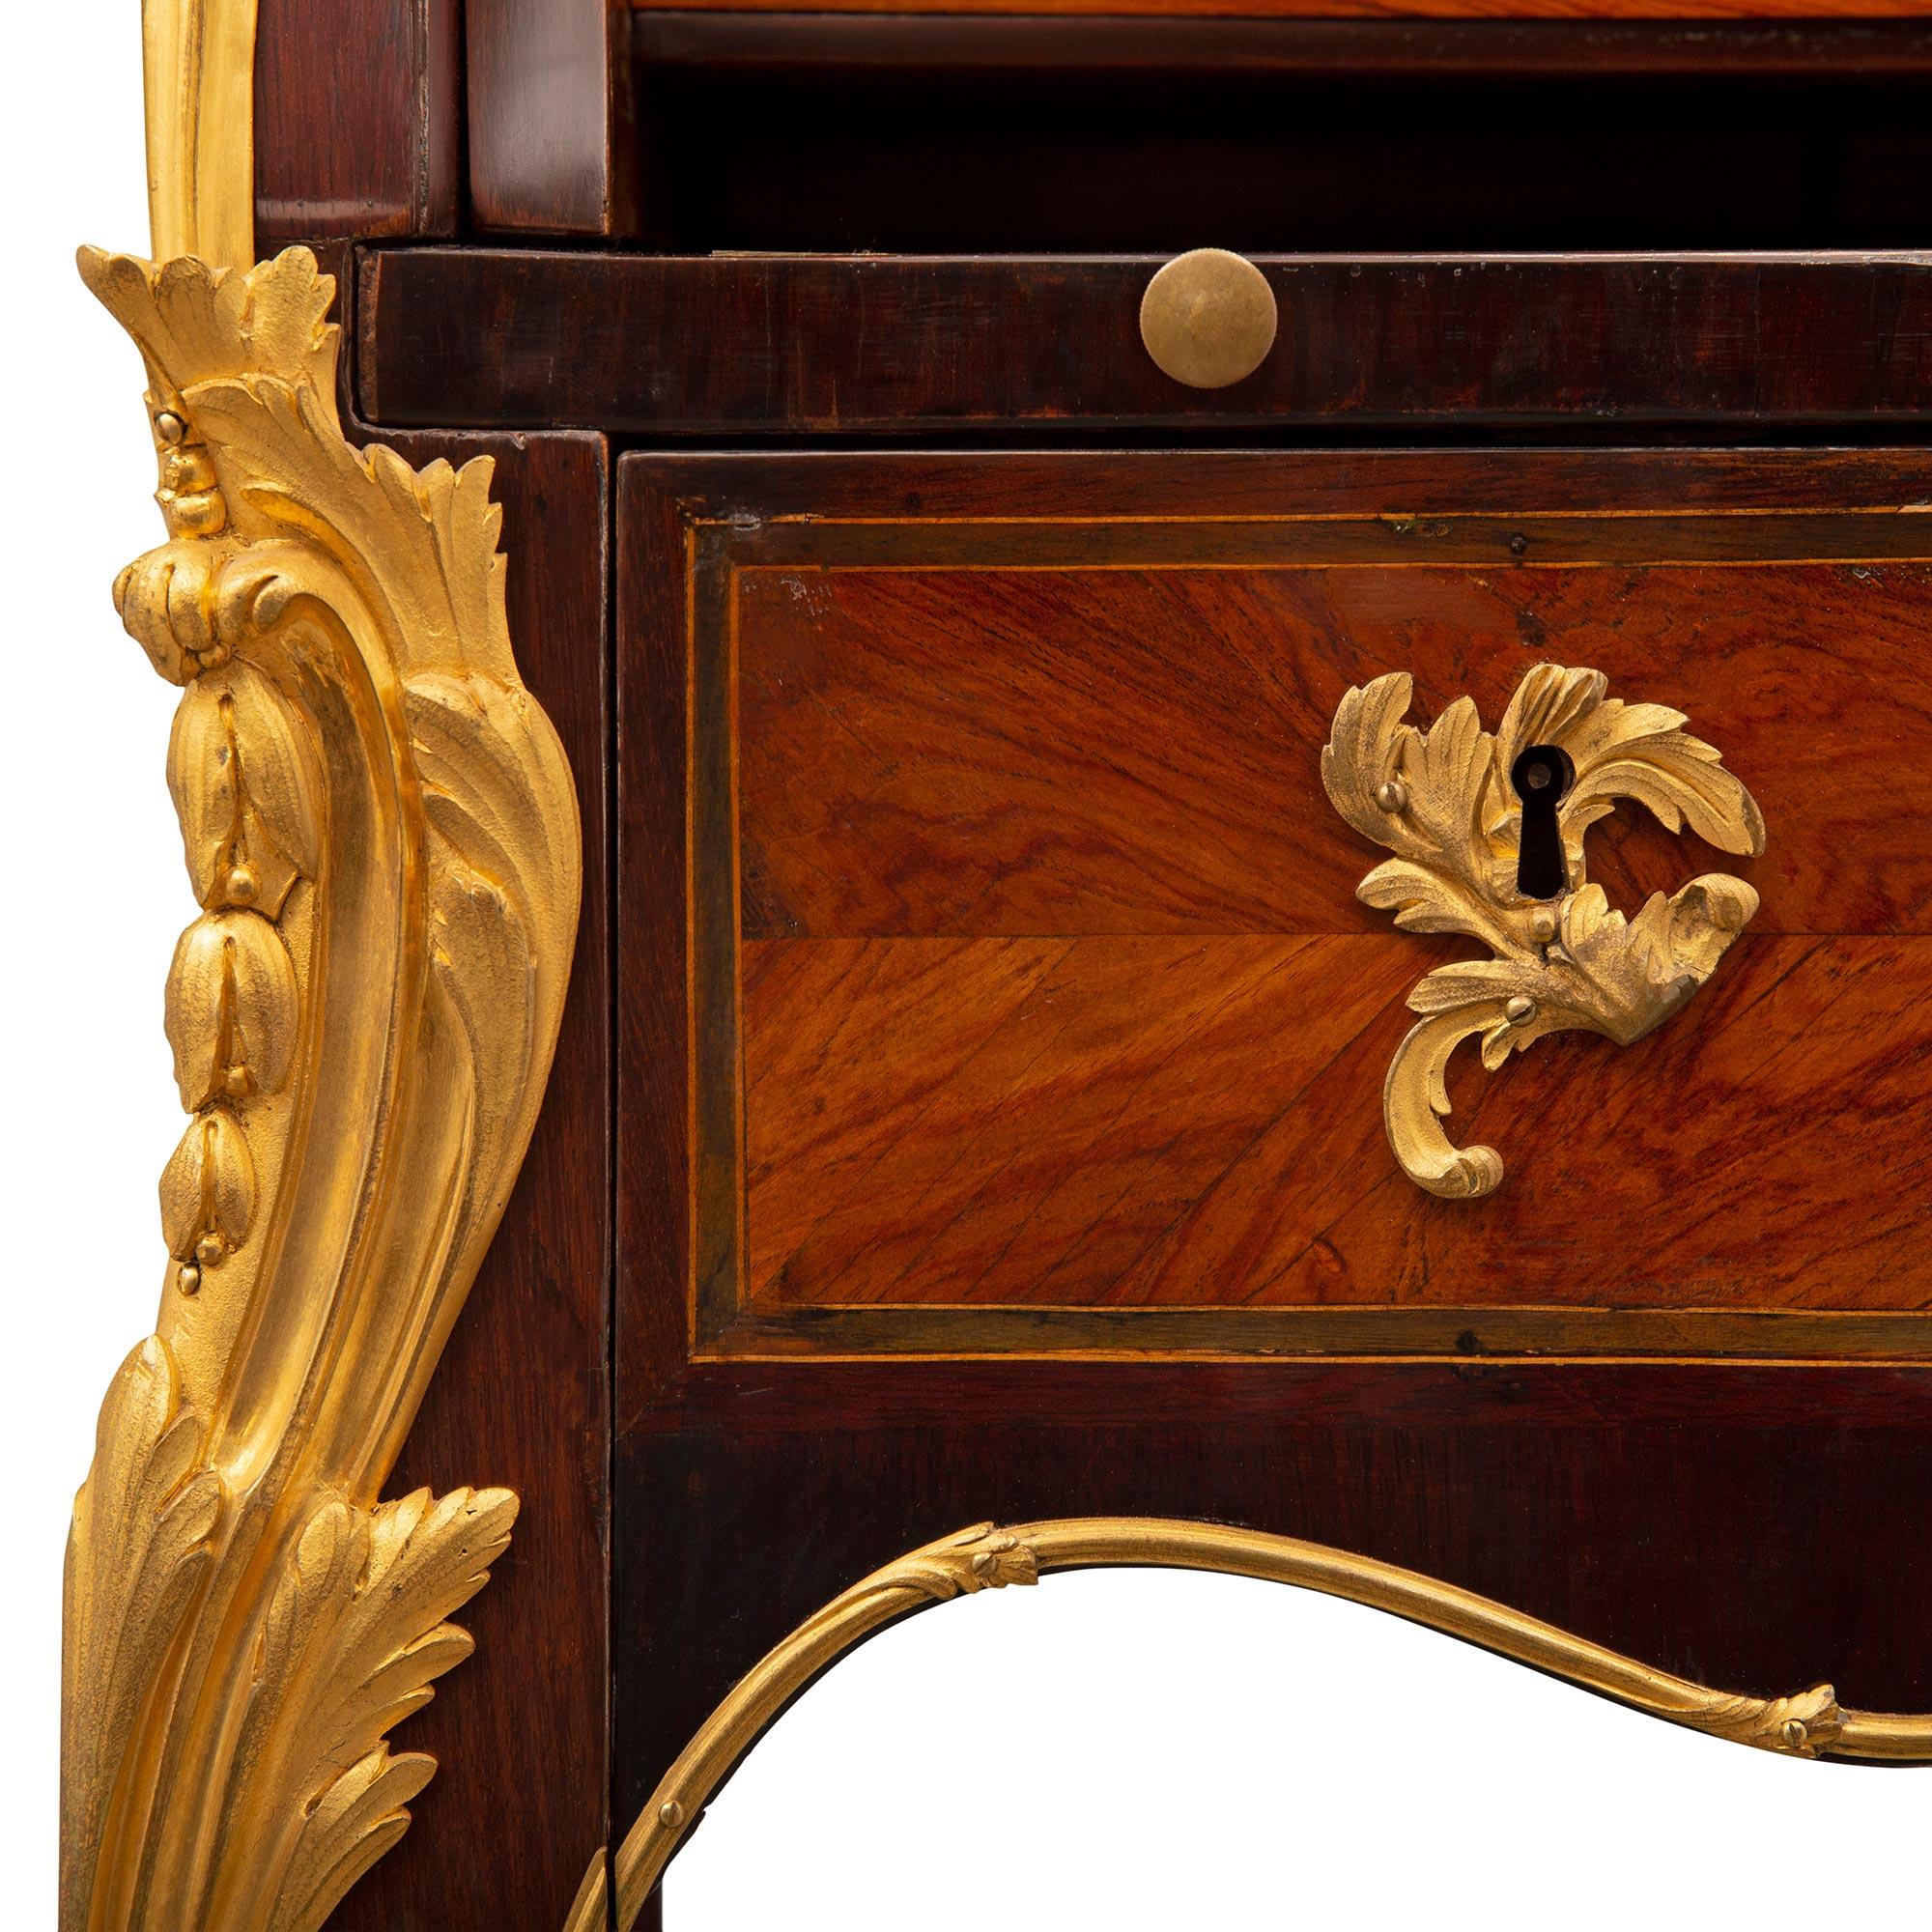 French 18th Century Louis XV Period Kingwood, Tulipwood and Ormolu Desk For Sale 7